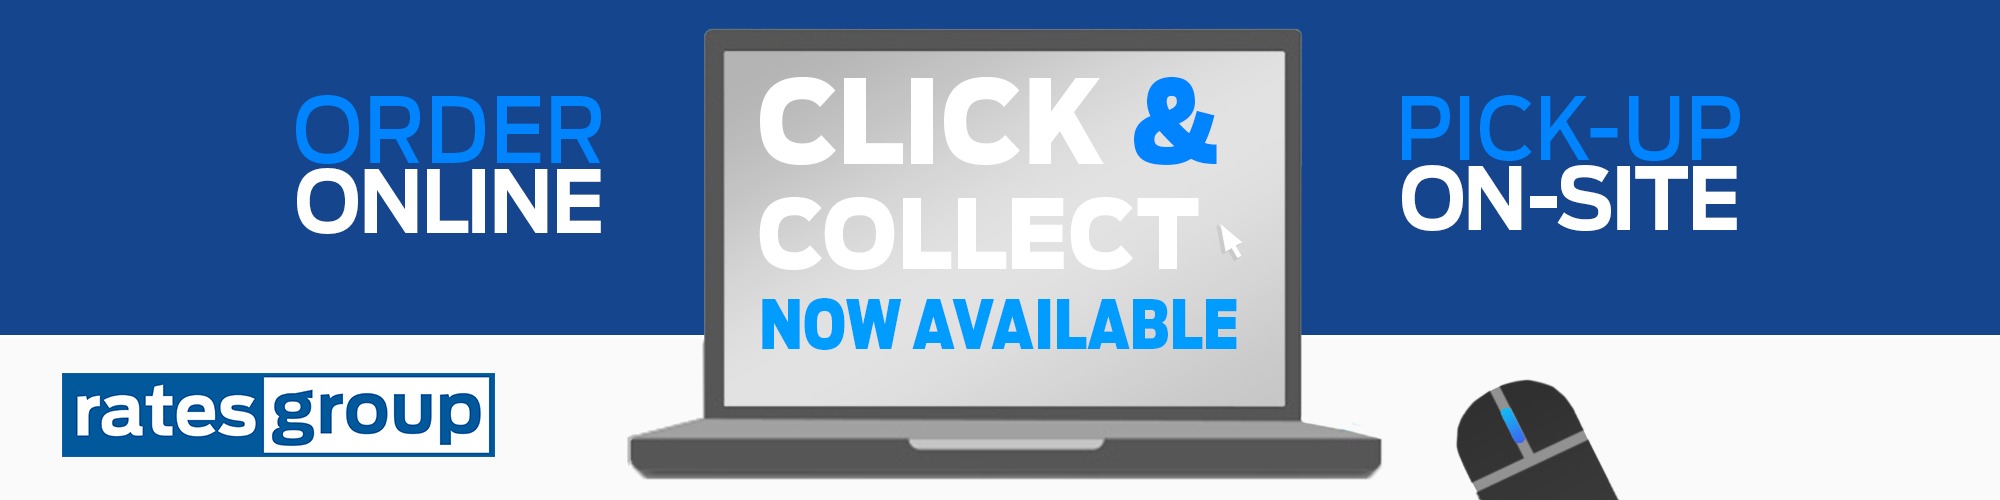 Click & Collect With Rates Group